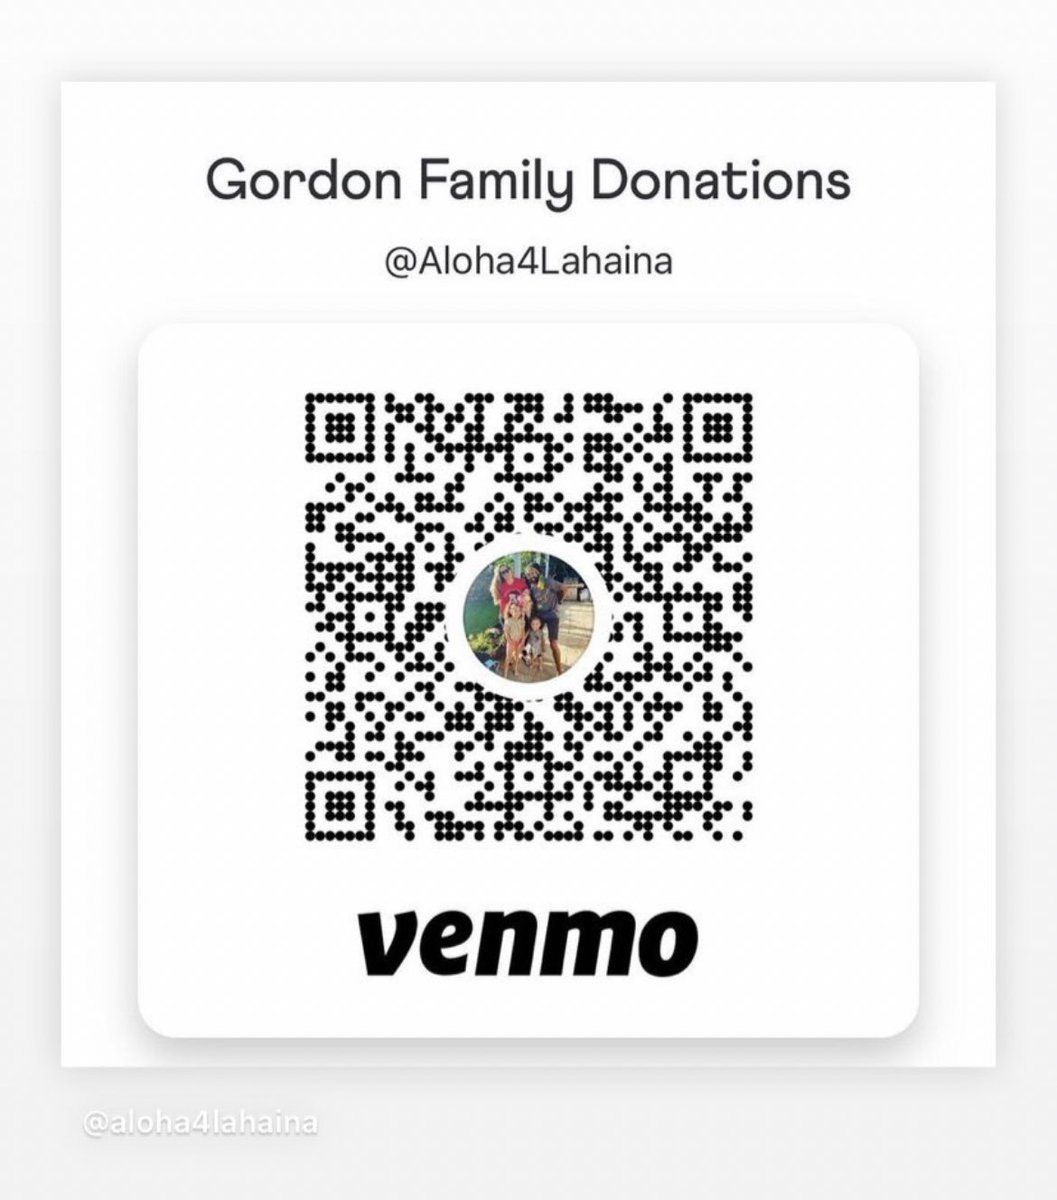 My dear friend’s brother and his family lived in Lahaina and lost everything in the Maui fire. Three little girls. If you’re looking for a way to make a difference directly, please donate and RT!